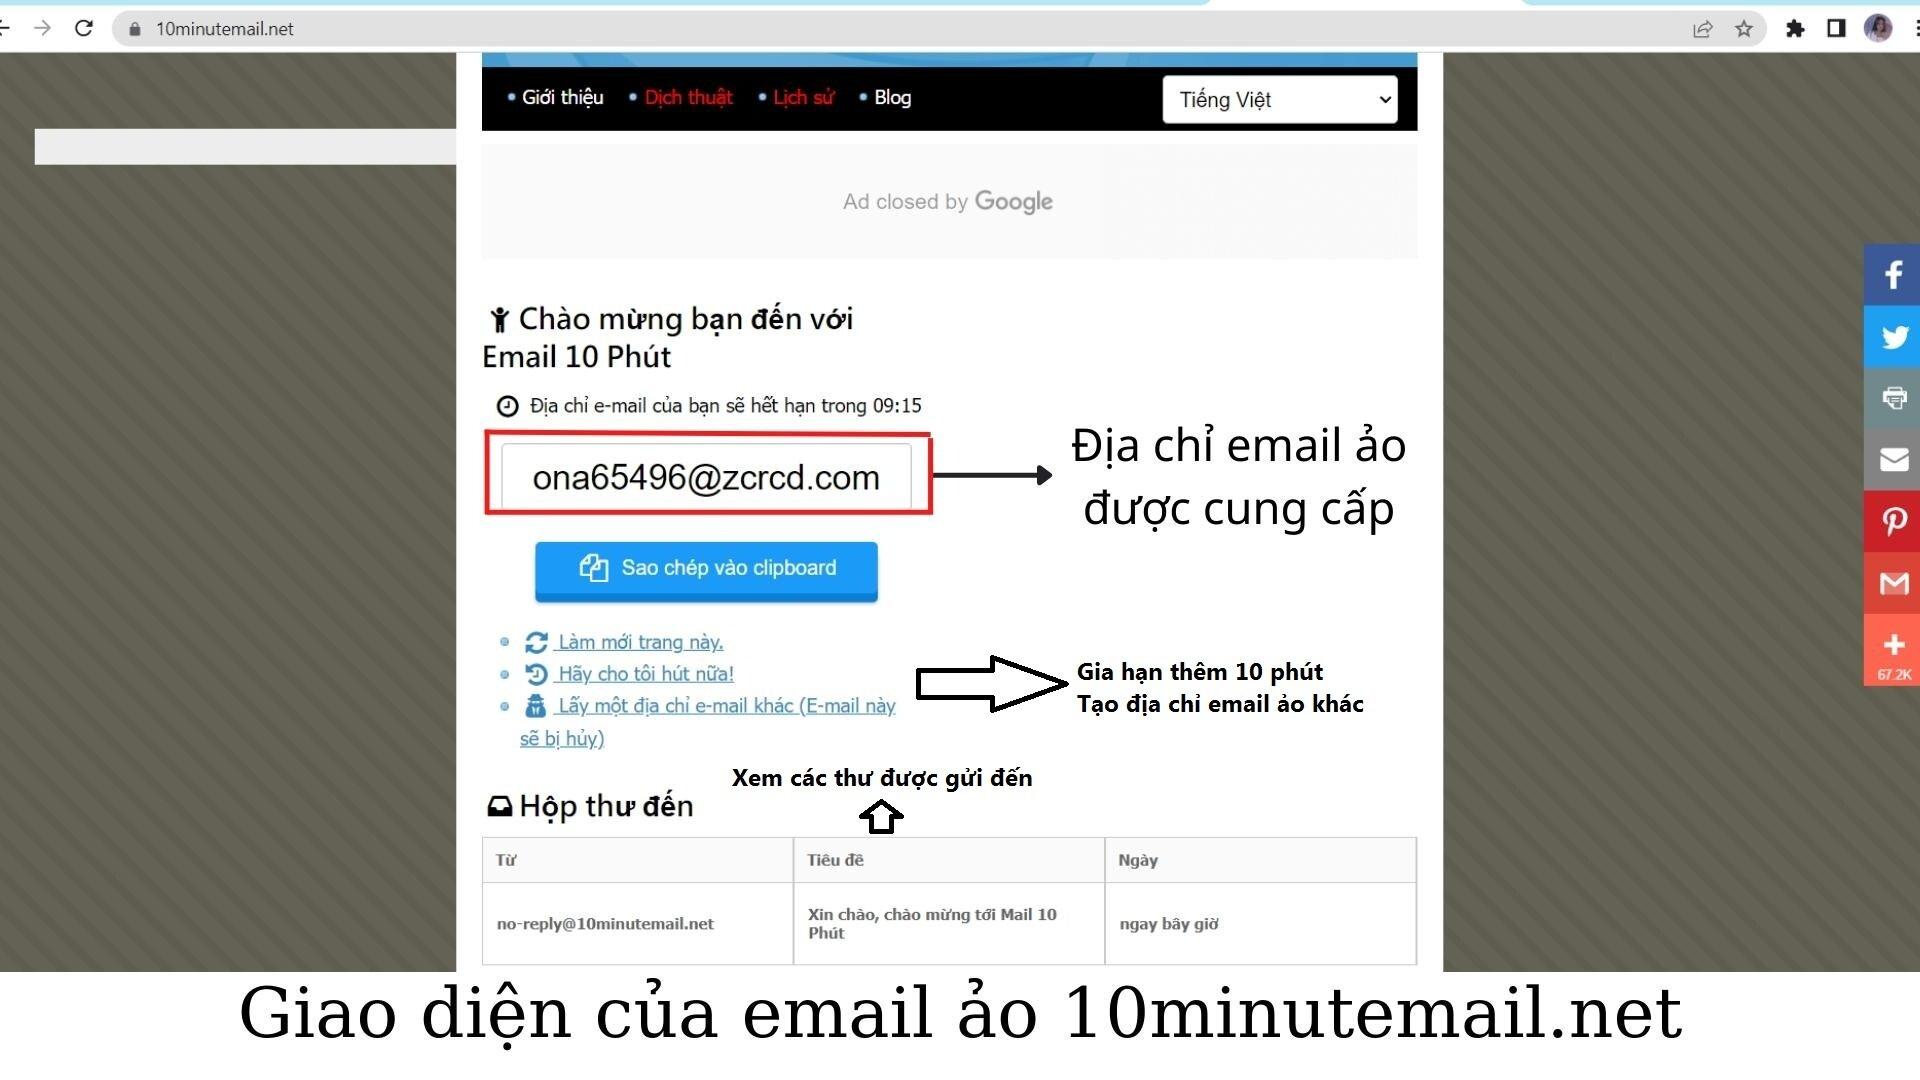 Giao diện của email ảo 10minutemail.net (Nguồn ảnh: BlogAnChoi).